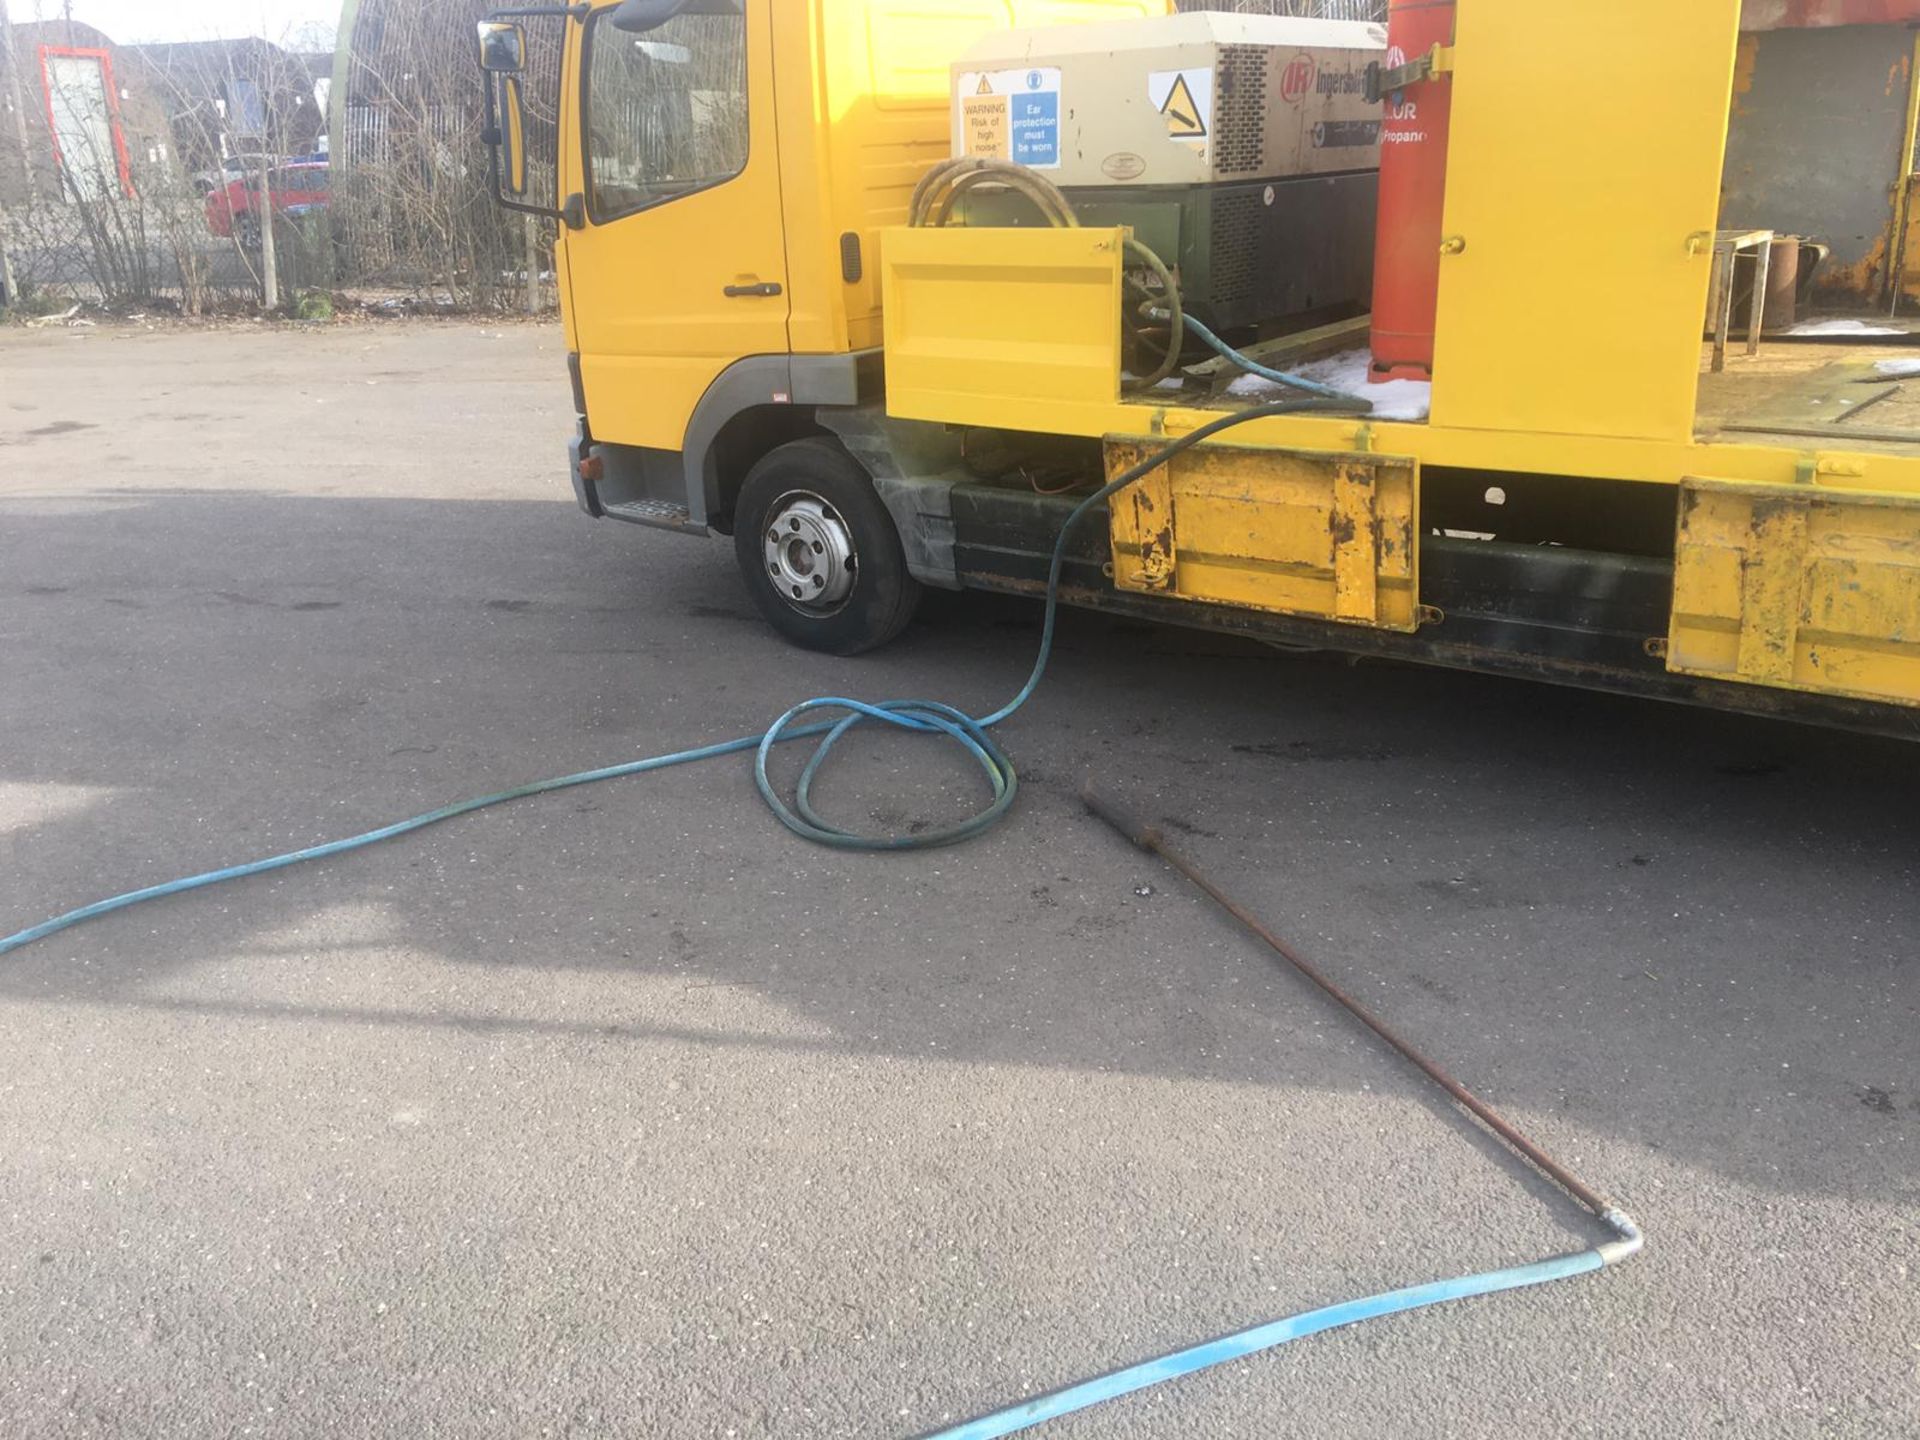 2004/54 REG MERCEDES ATEGO 1018 DAY YELLOW DROPSIDE LINE PAINTING LORRY 4.3L DIESEL ENGINE *NO VAT* - Image 7 of 64